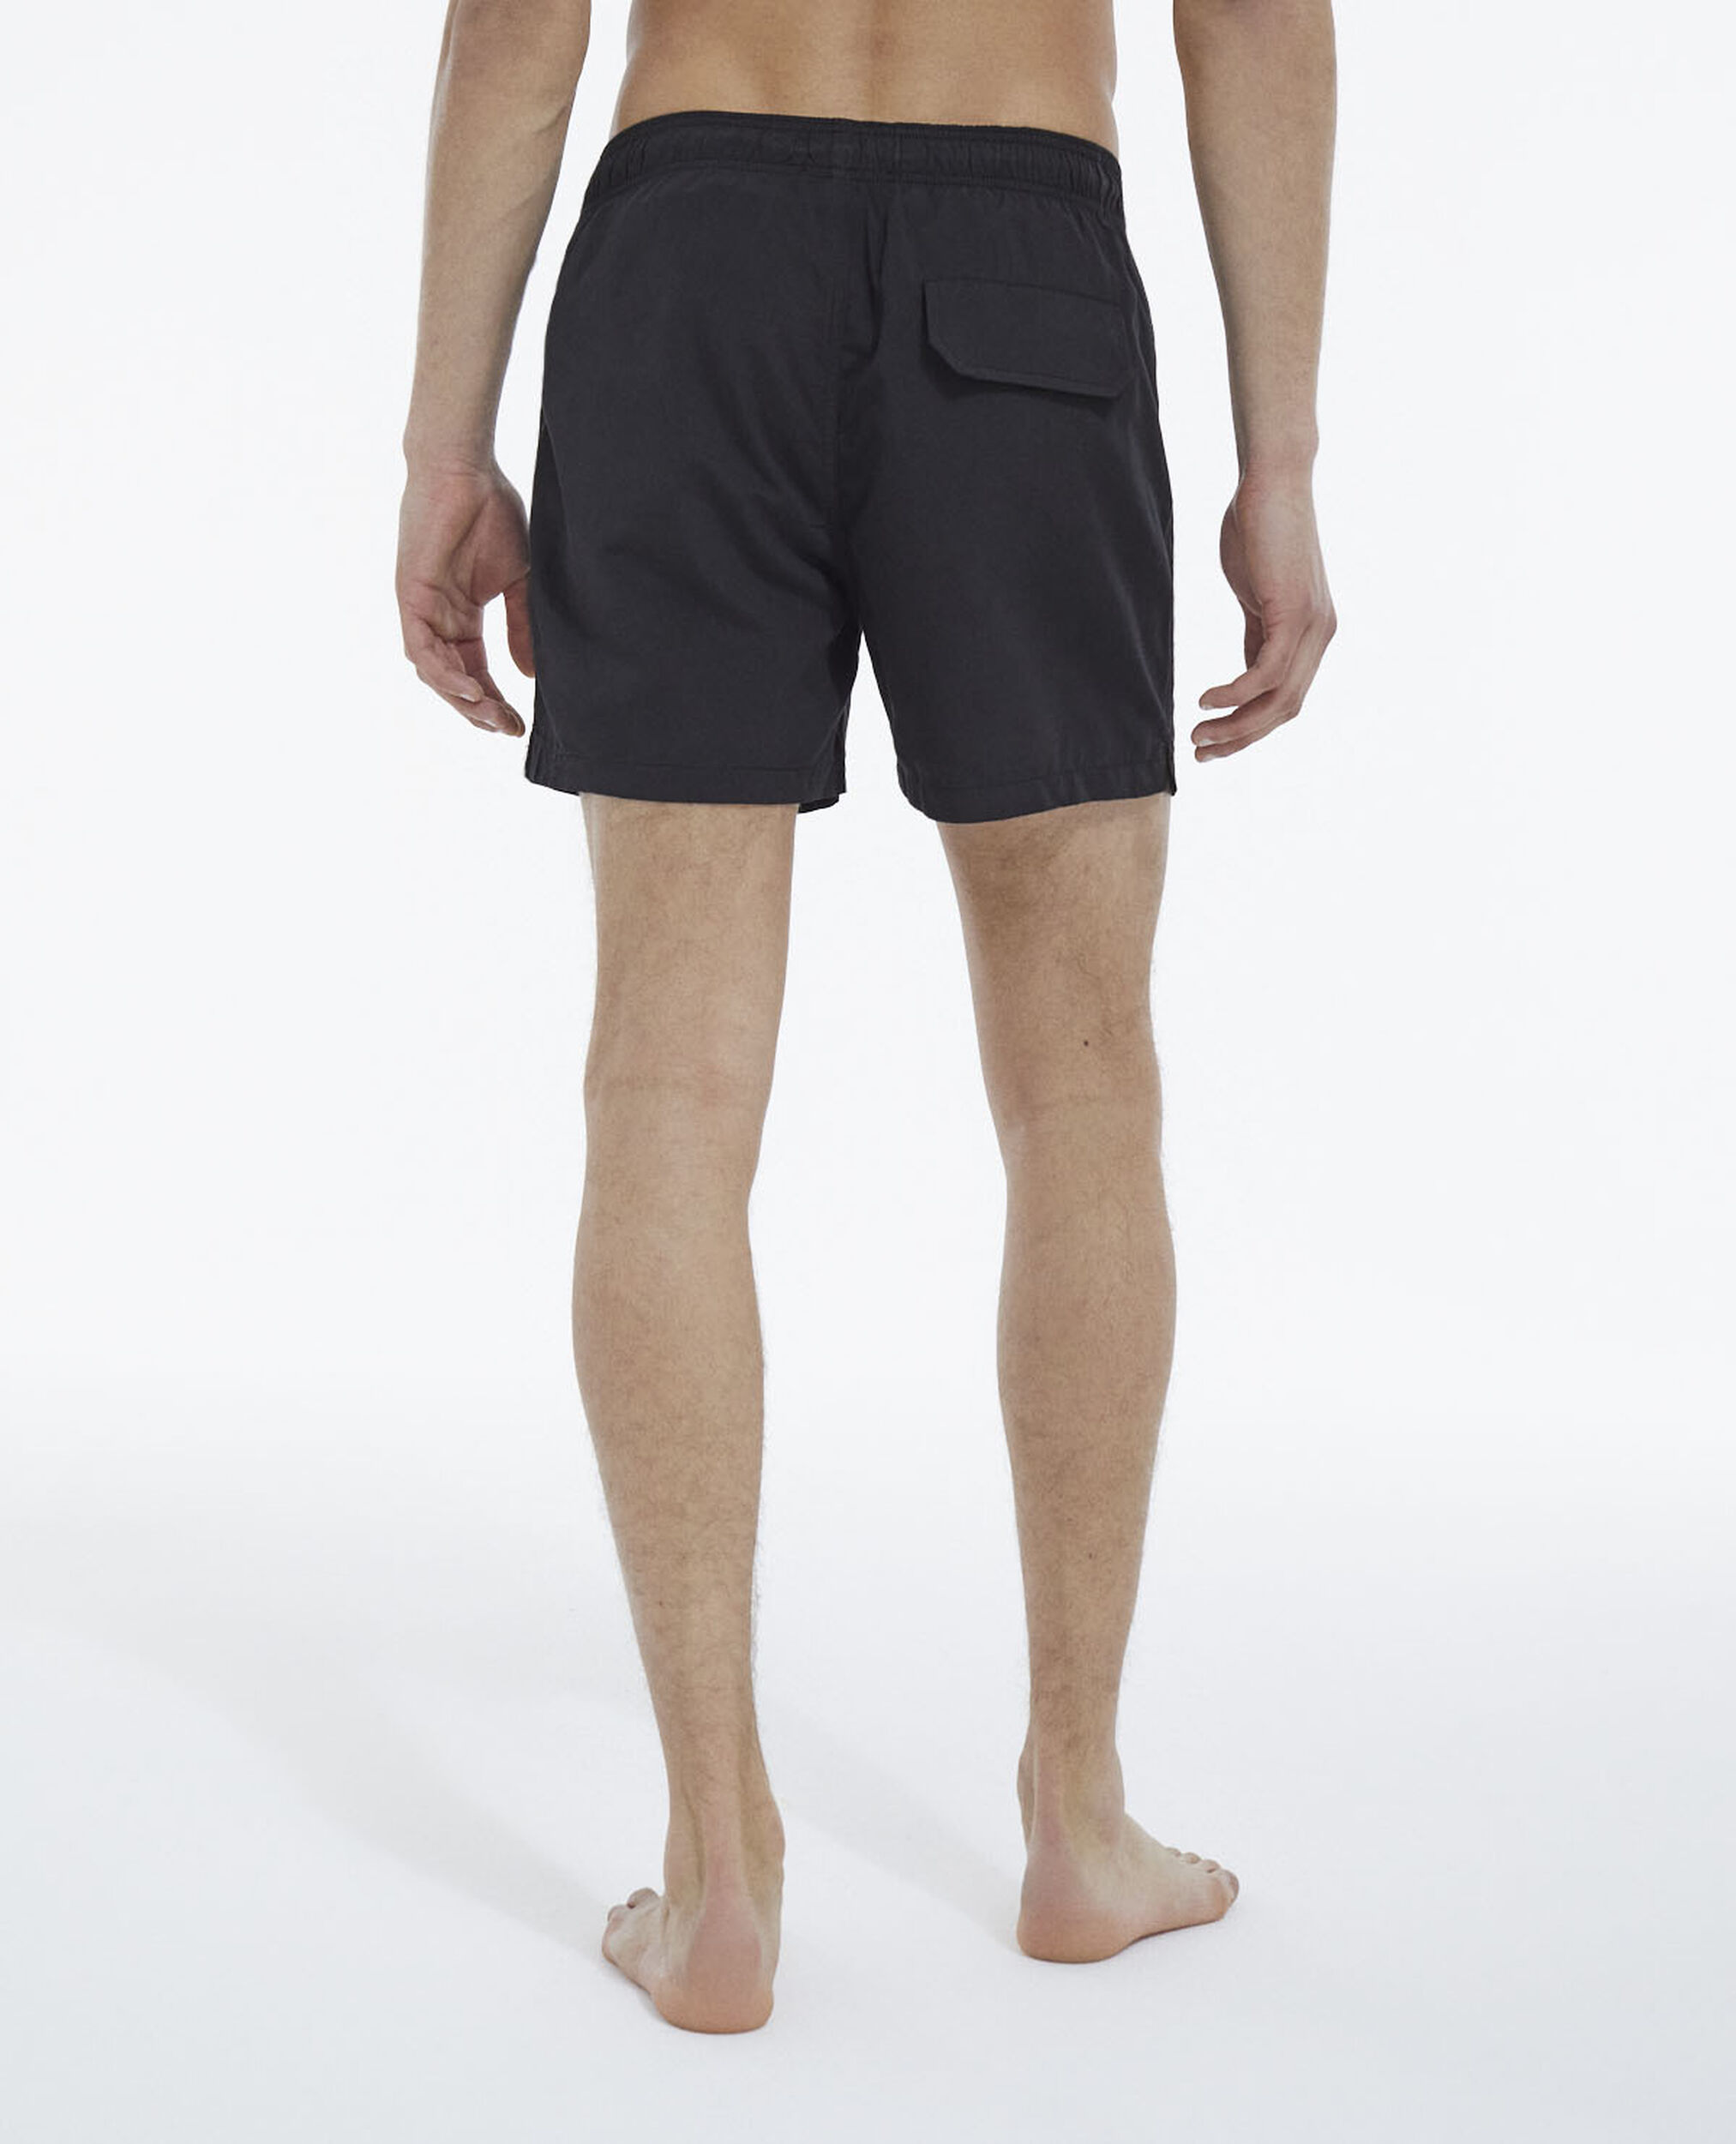 Black swim shorts with small The Kooples logo, BLACK, hi-res image number null